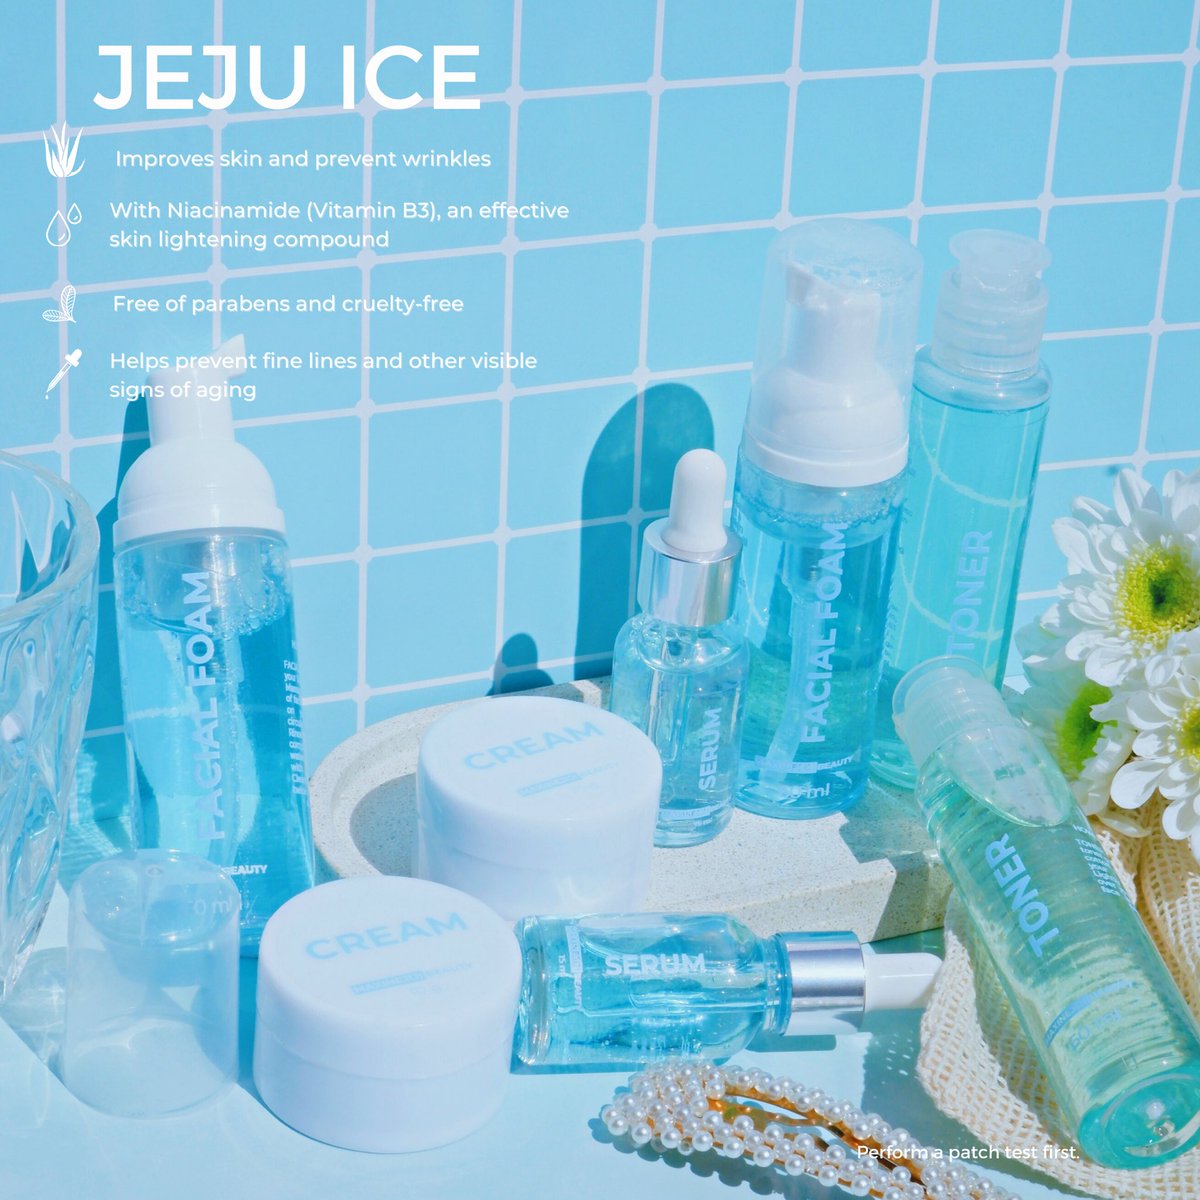 Keep your skin free of dirt and bacteria while enjoying outdoors by cleansing your skin twice daily with our gentle Jeju Ice skin care. 🥰

#BeautyWithoutLimits
#MAXINEJIJIBeauty